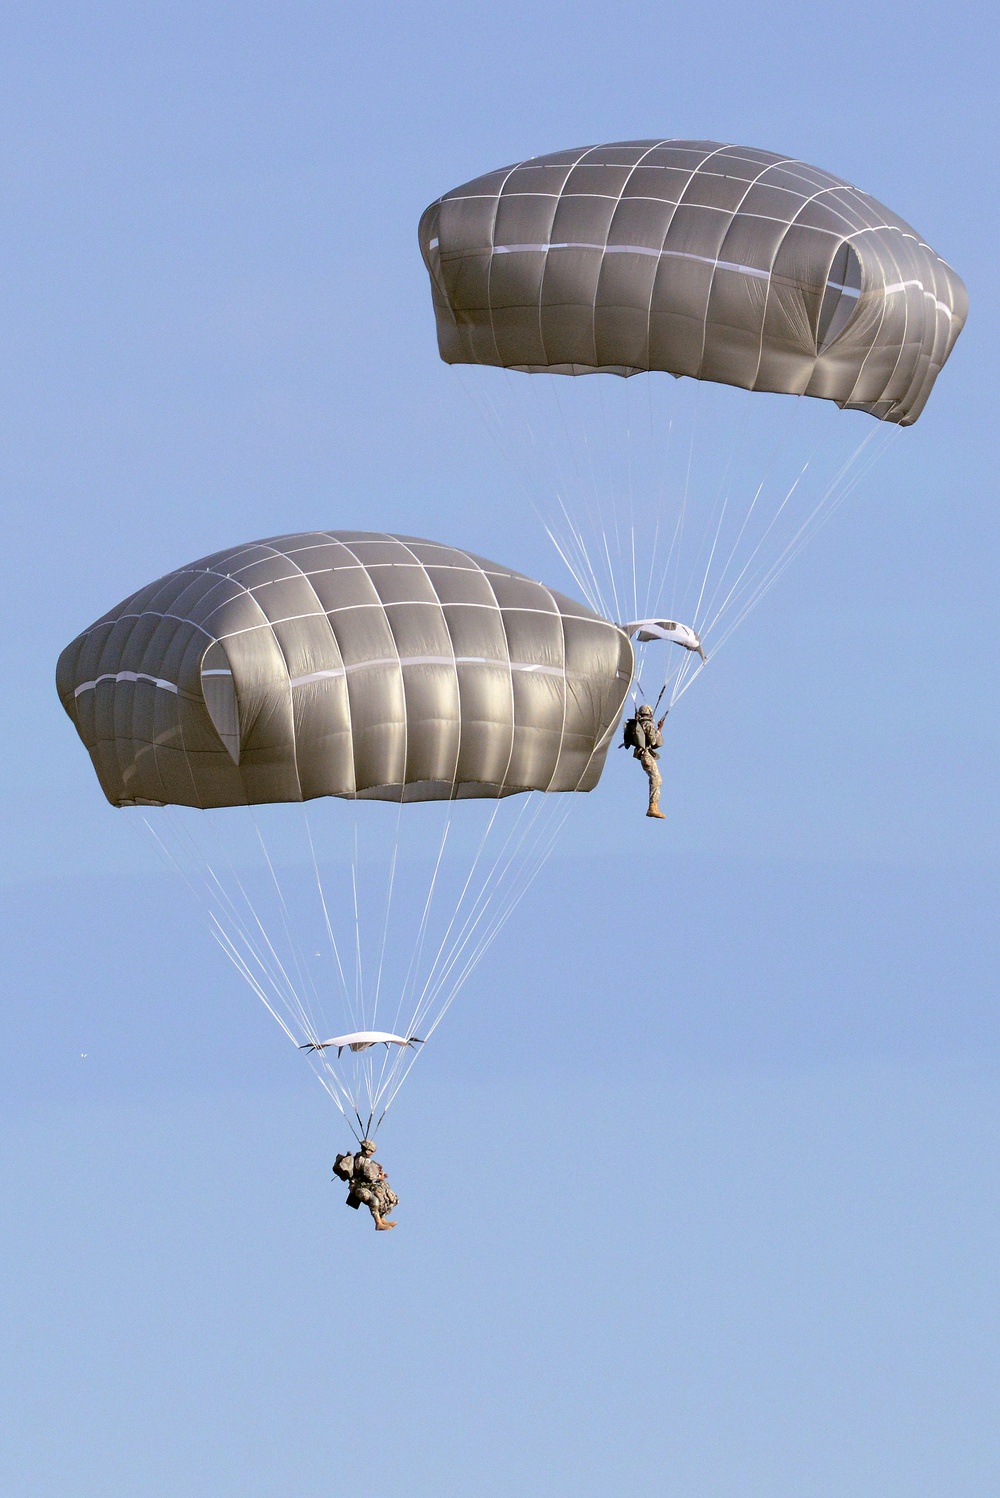 173rd Infantry Brigade Combat Team (Airborne) conducts combat training jump at the 7th Army Joint Multinational Training Command's Grafenwoehr Training Area